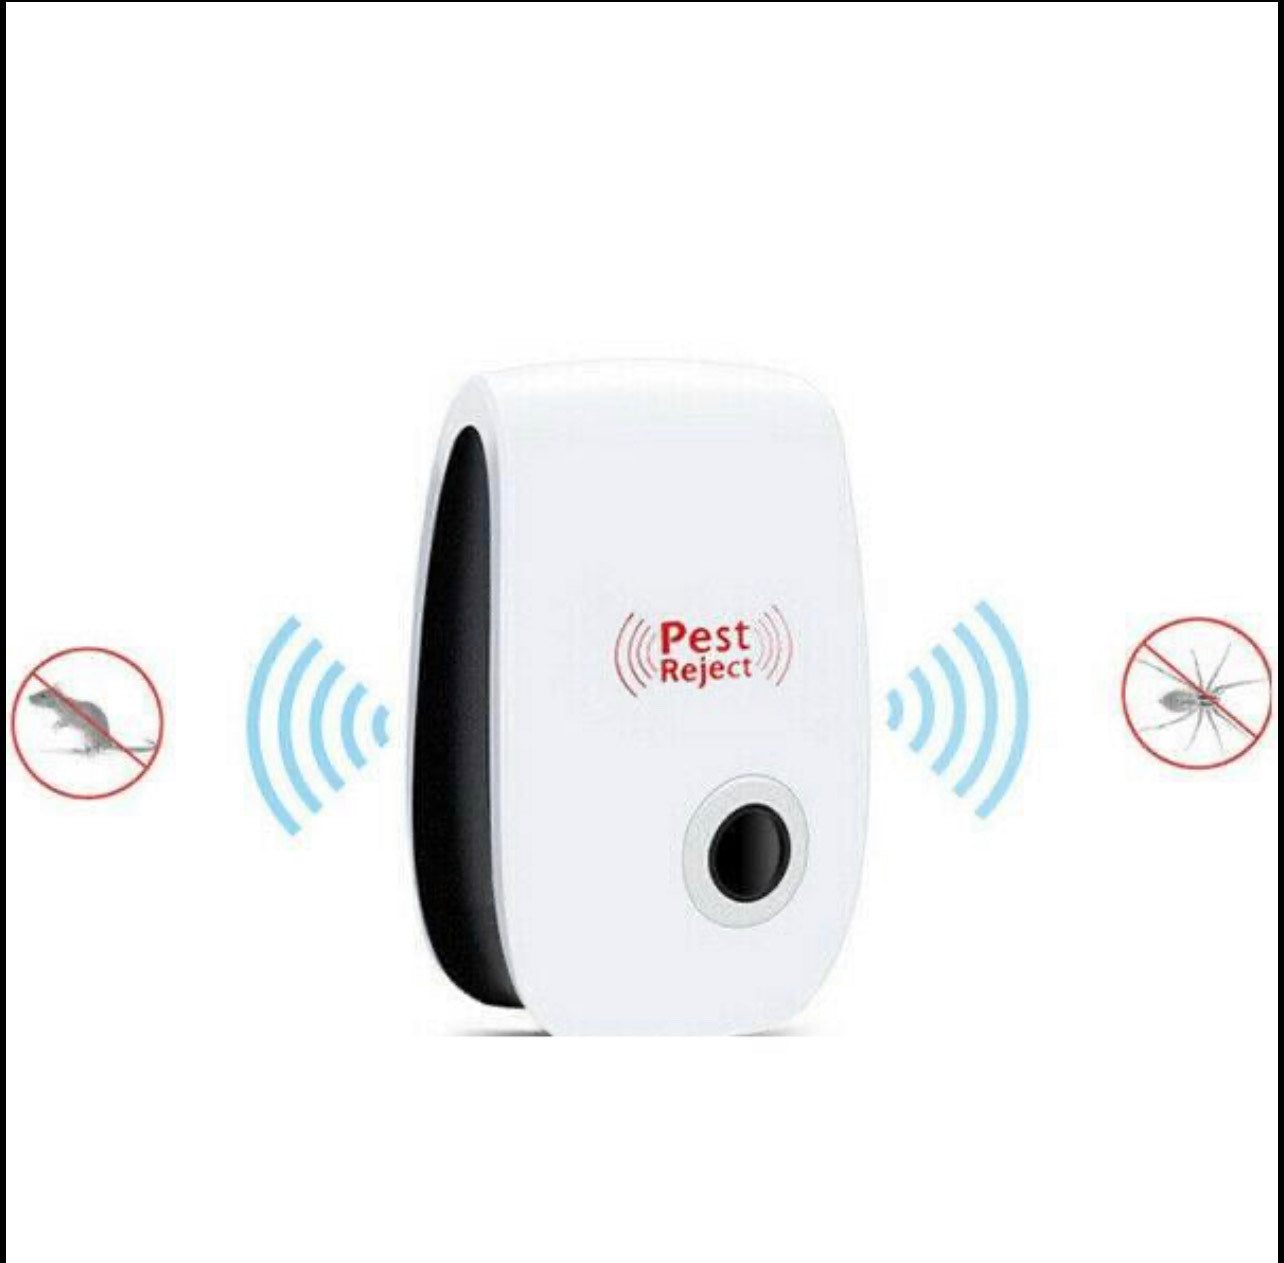 Electronic Pest Reject Control Ultrasonic Repellent Home Bug Rat Spider Roaches home safe tools gift